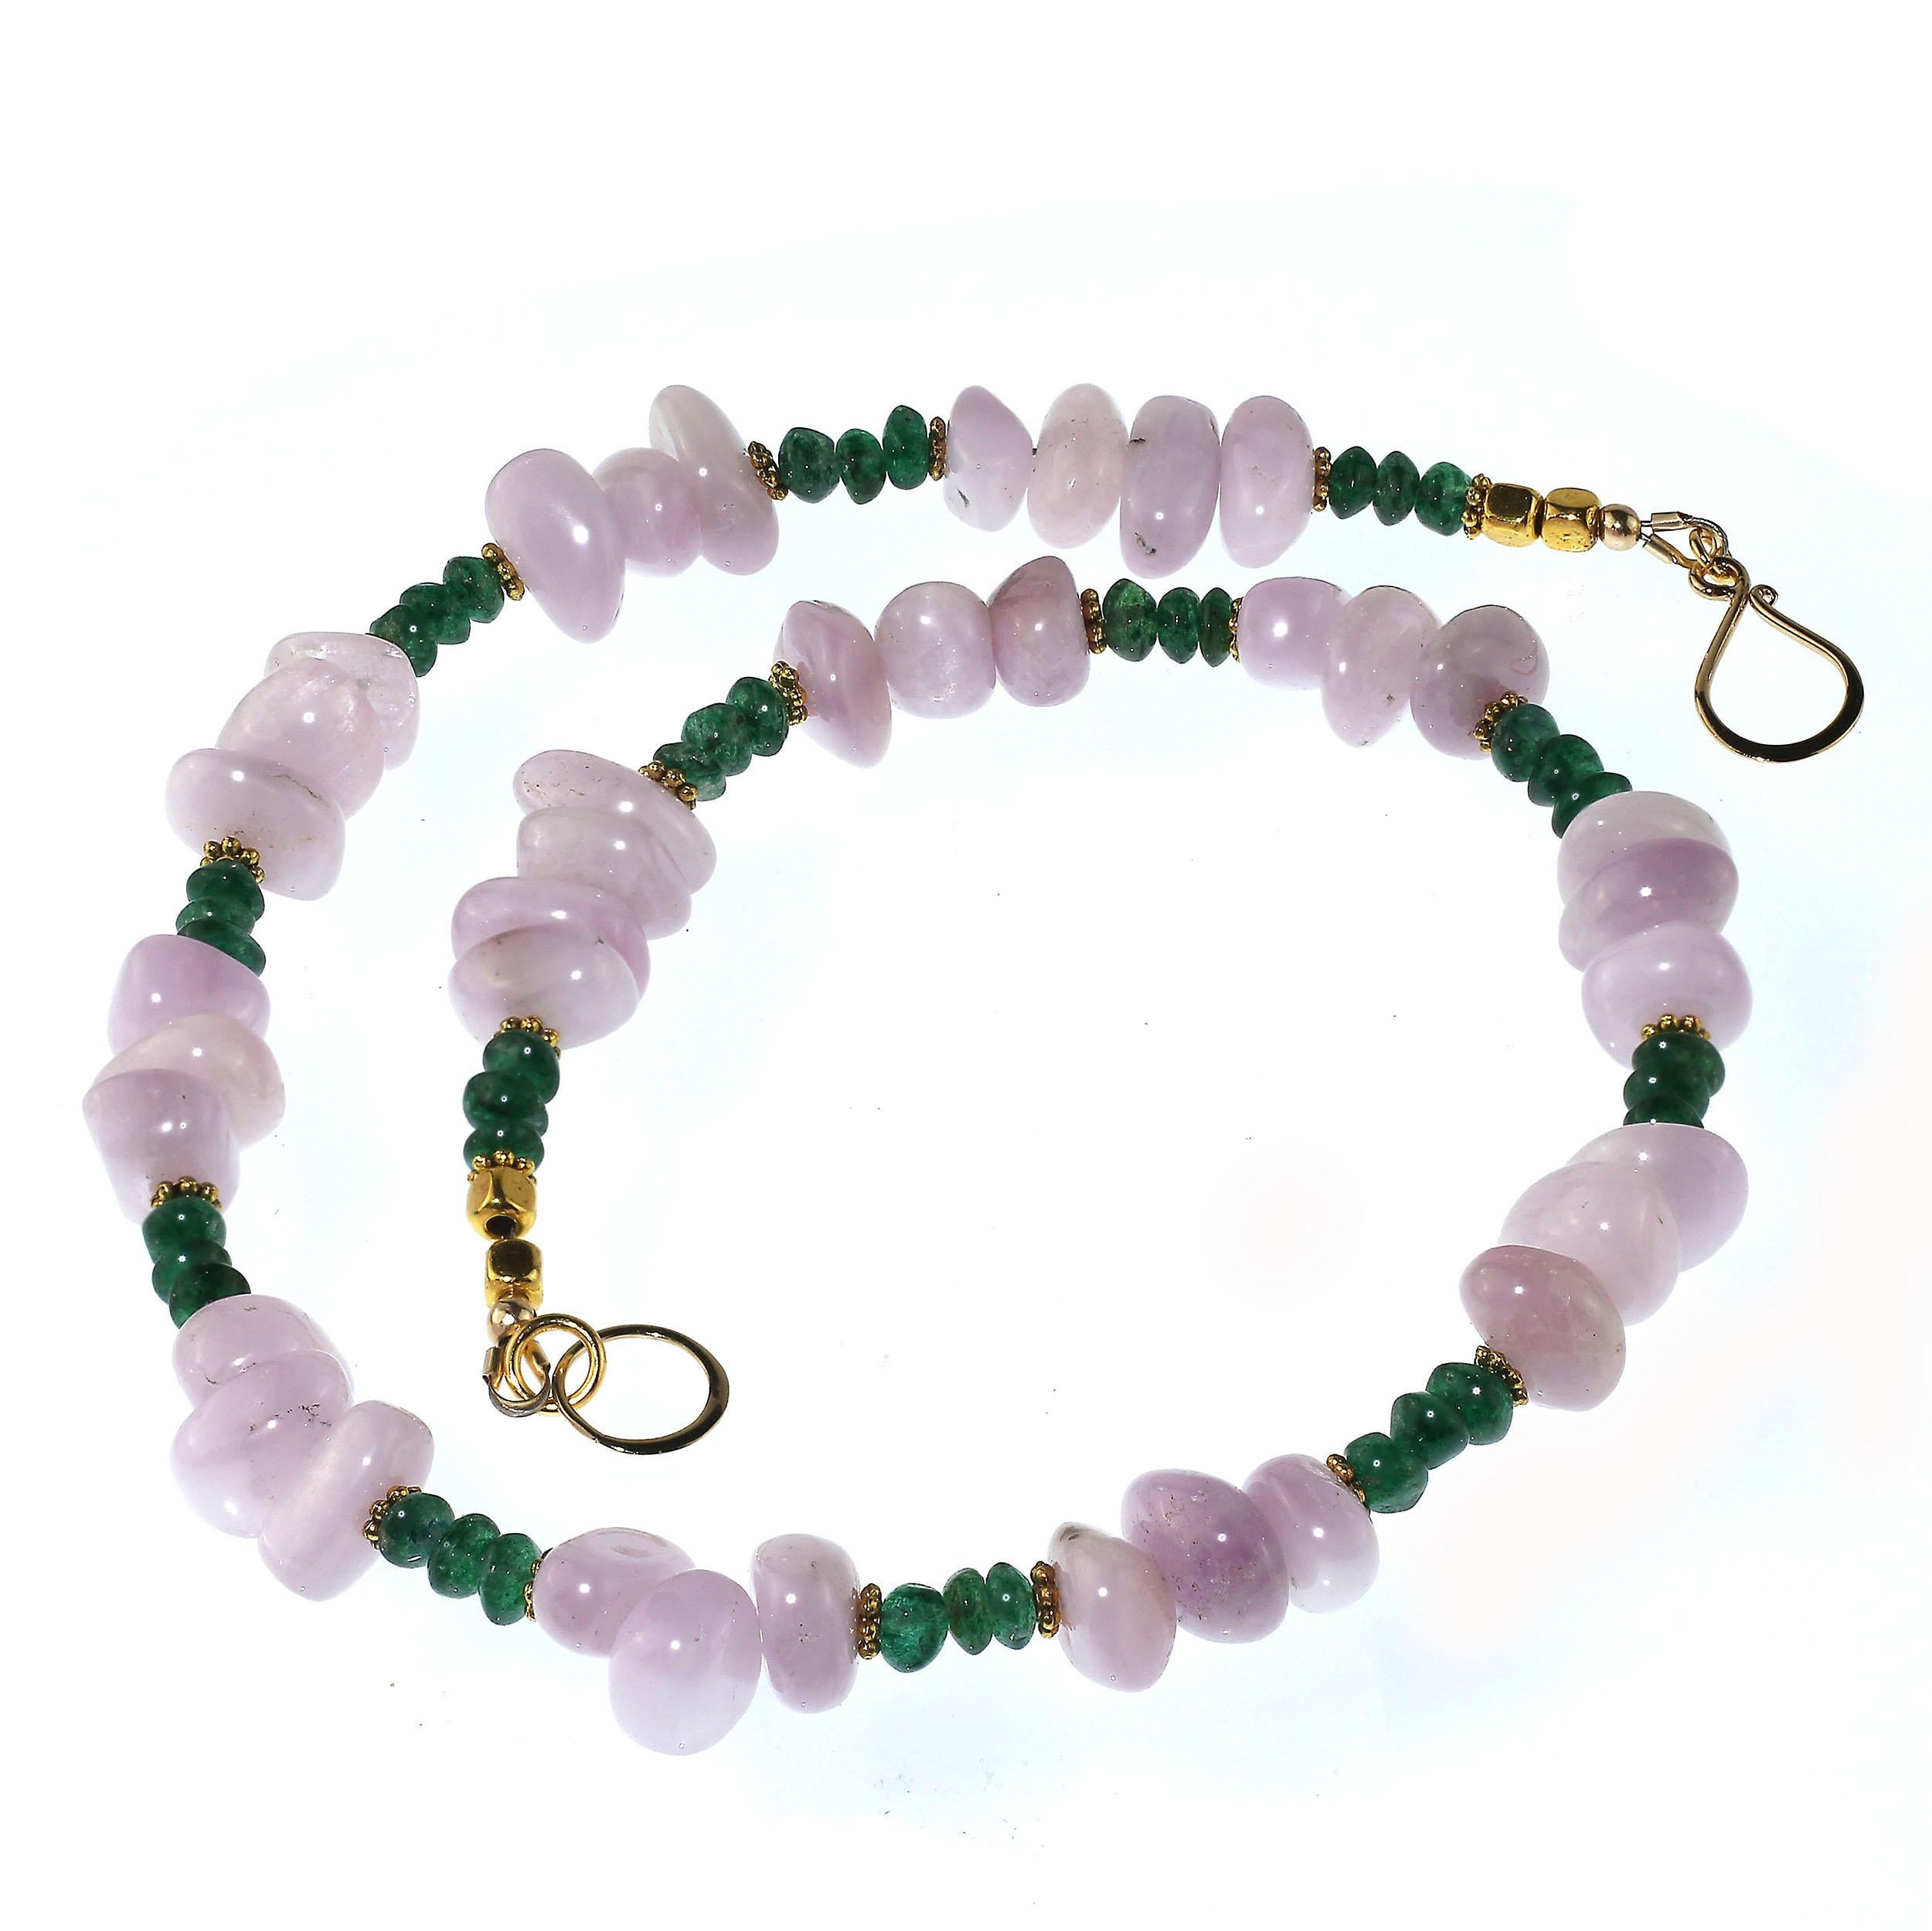 AJD Glowing Kunzite and Aventurine Necklace for Summer Fun For Sale 4